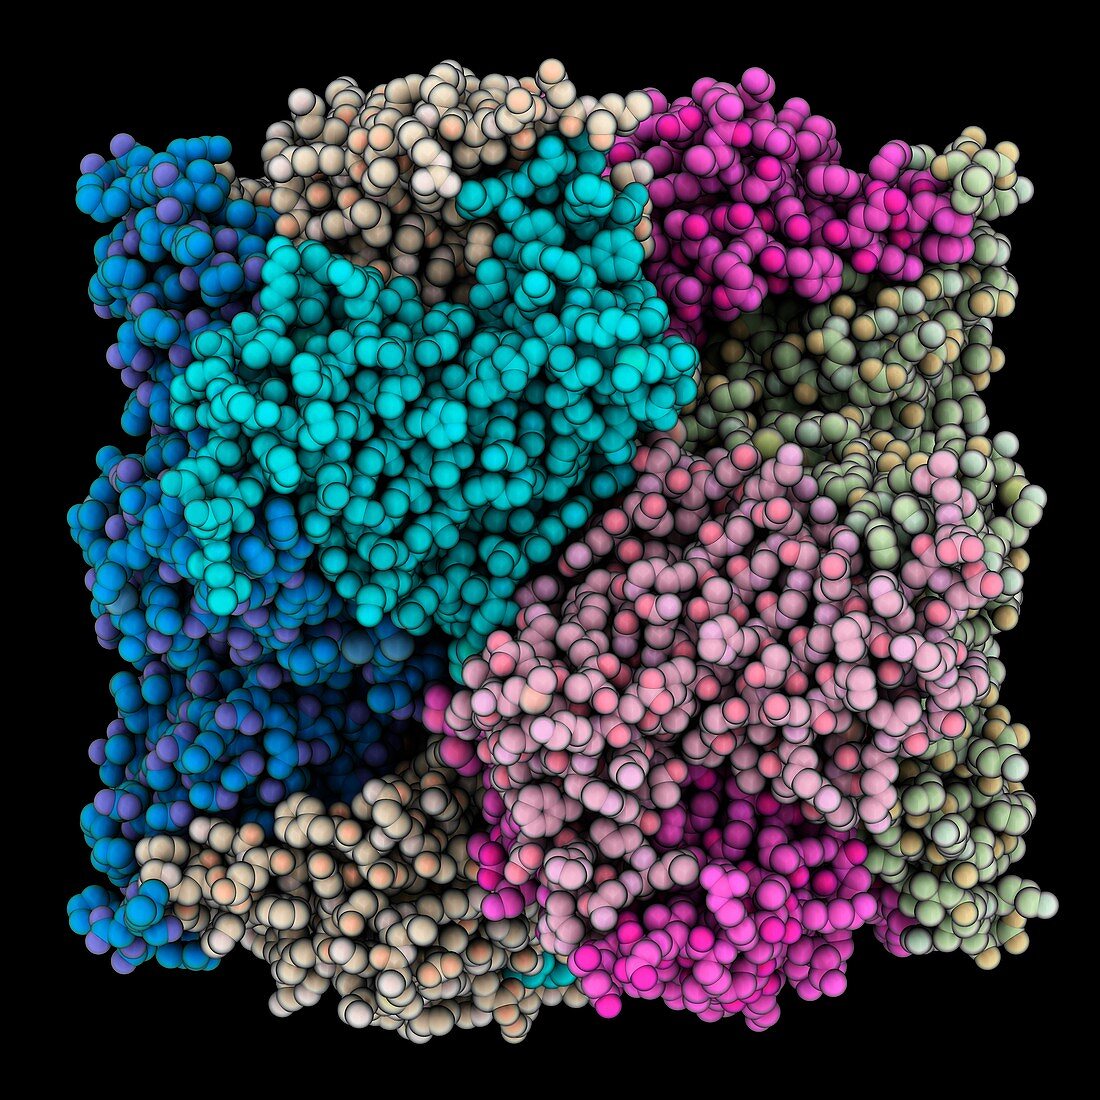 Protein with tetrahedral symmetry